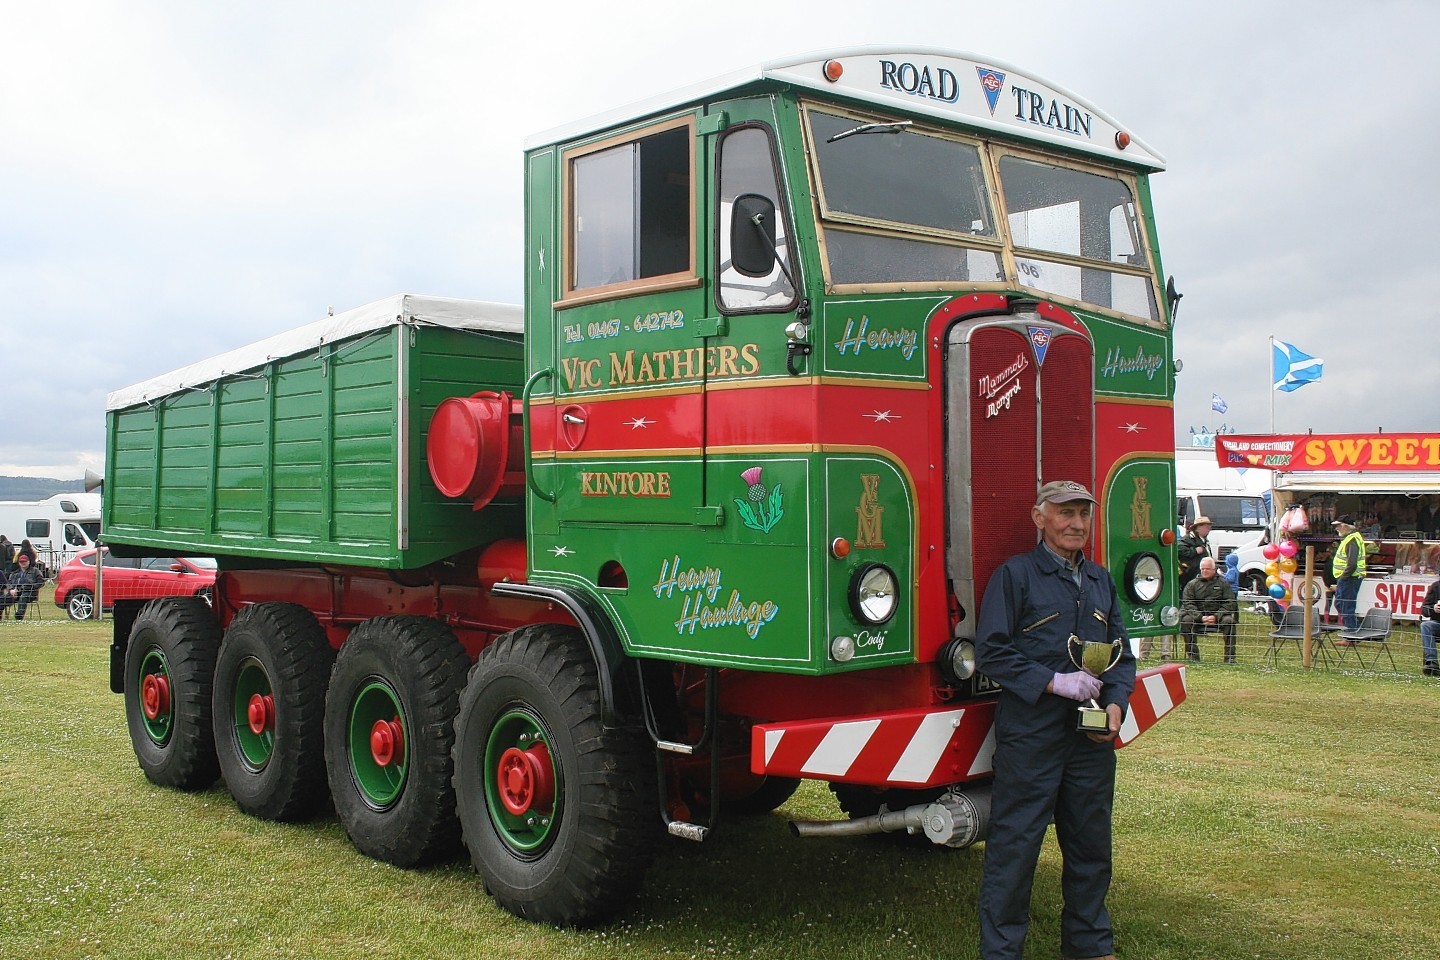 Vic Mathers of Kintore with his award in front of his masterful eight-wheel drive AEC Road train creation.